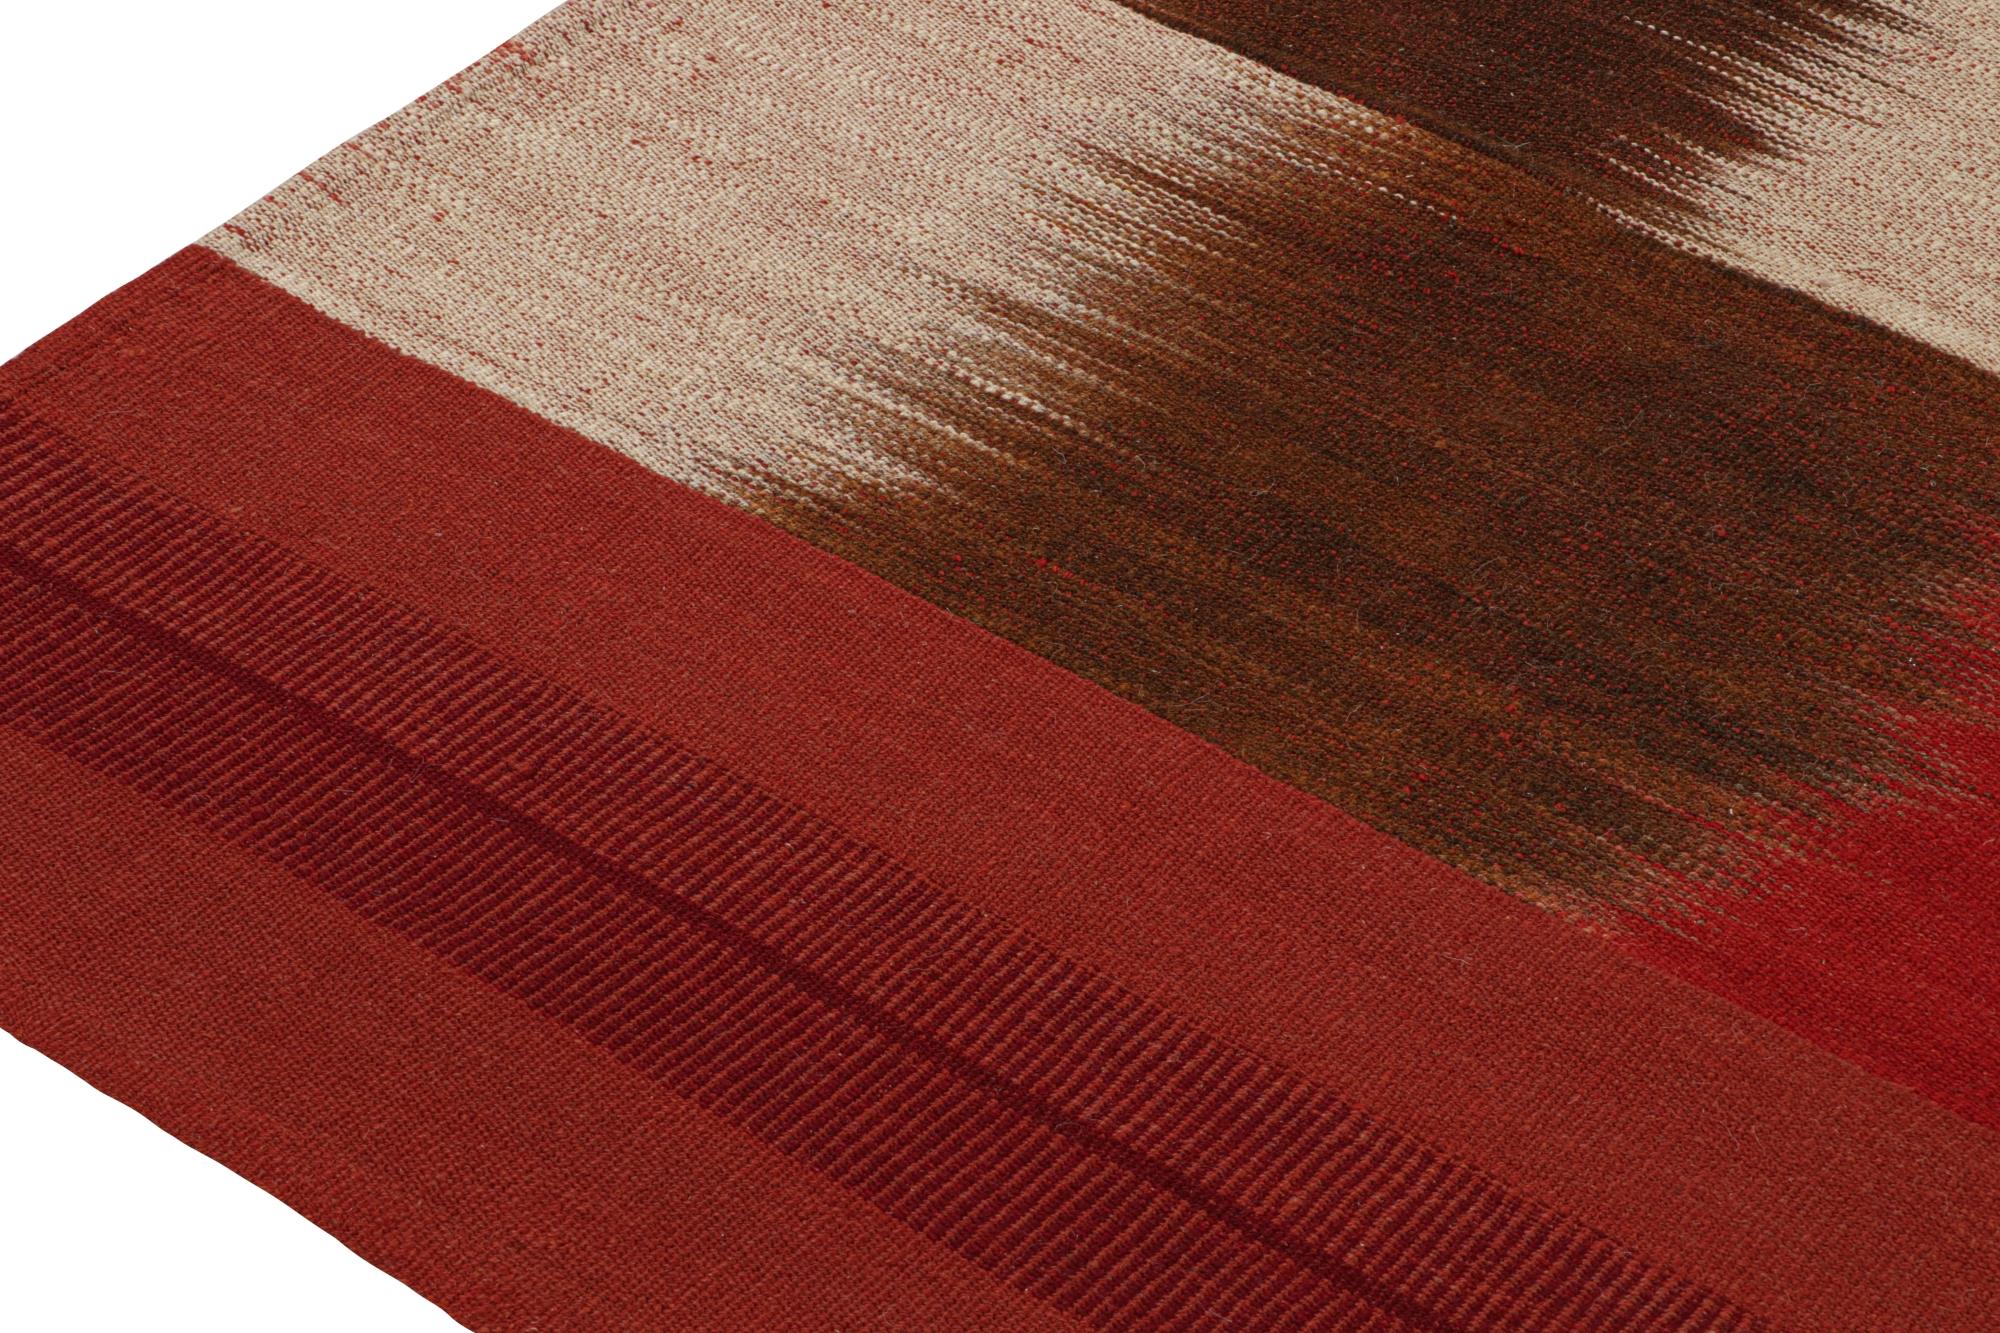 Rug & Kilim’s Contemporary Kilim in Red, Brown and Off-White In New Condition For Sale In Long Island City, NY